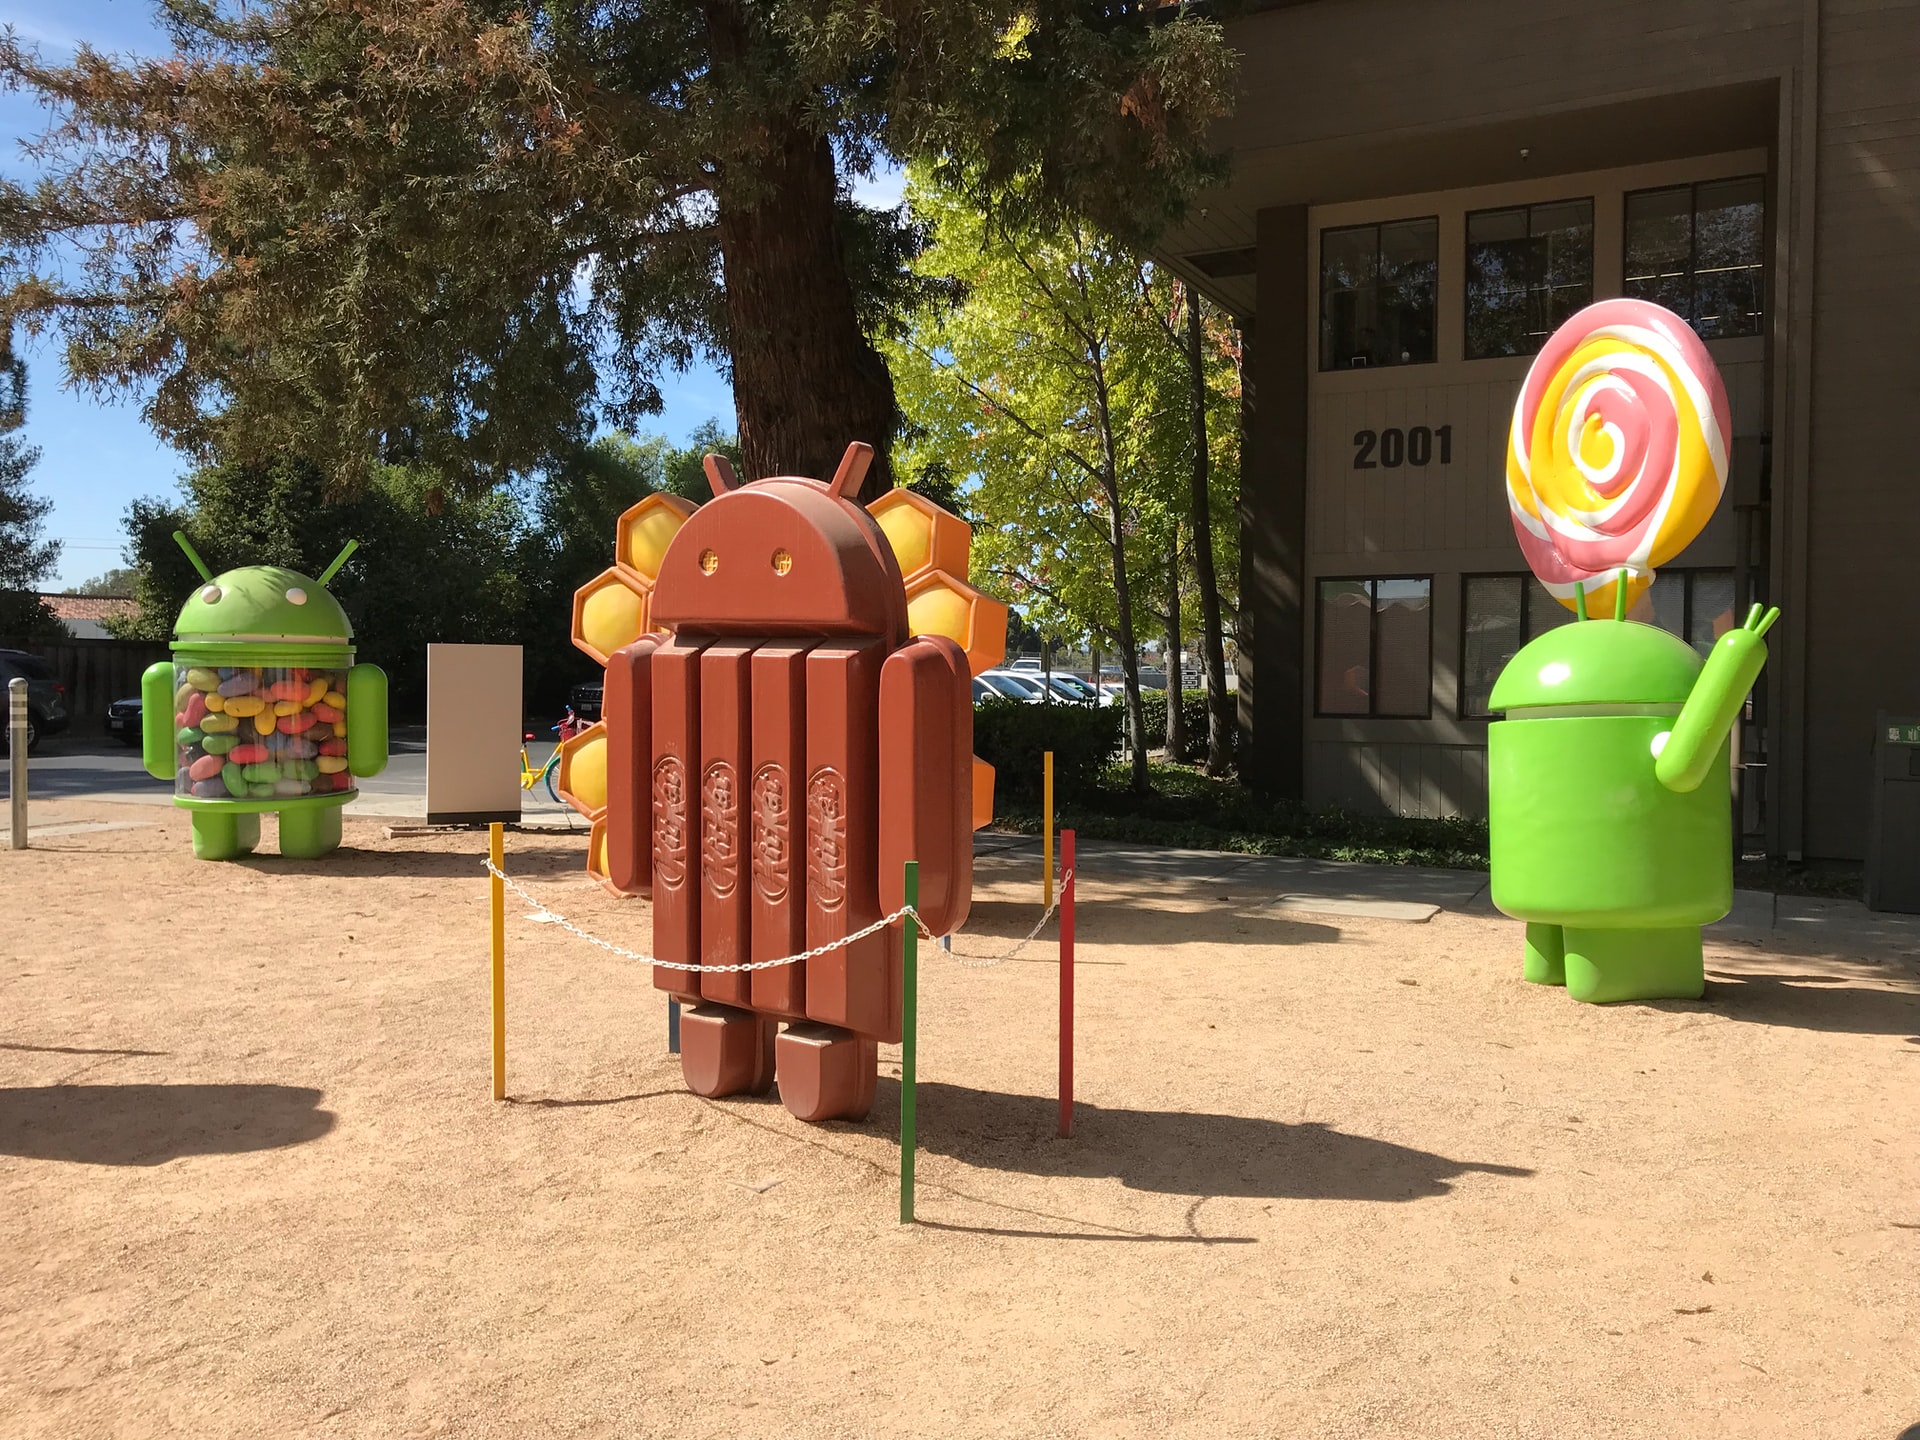 Geek insider, geekinsider, geekinsider. Com,, compelling new features are coming to android in 2022, android